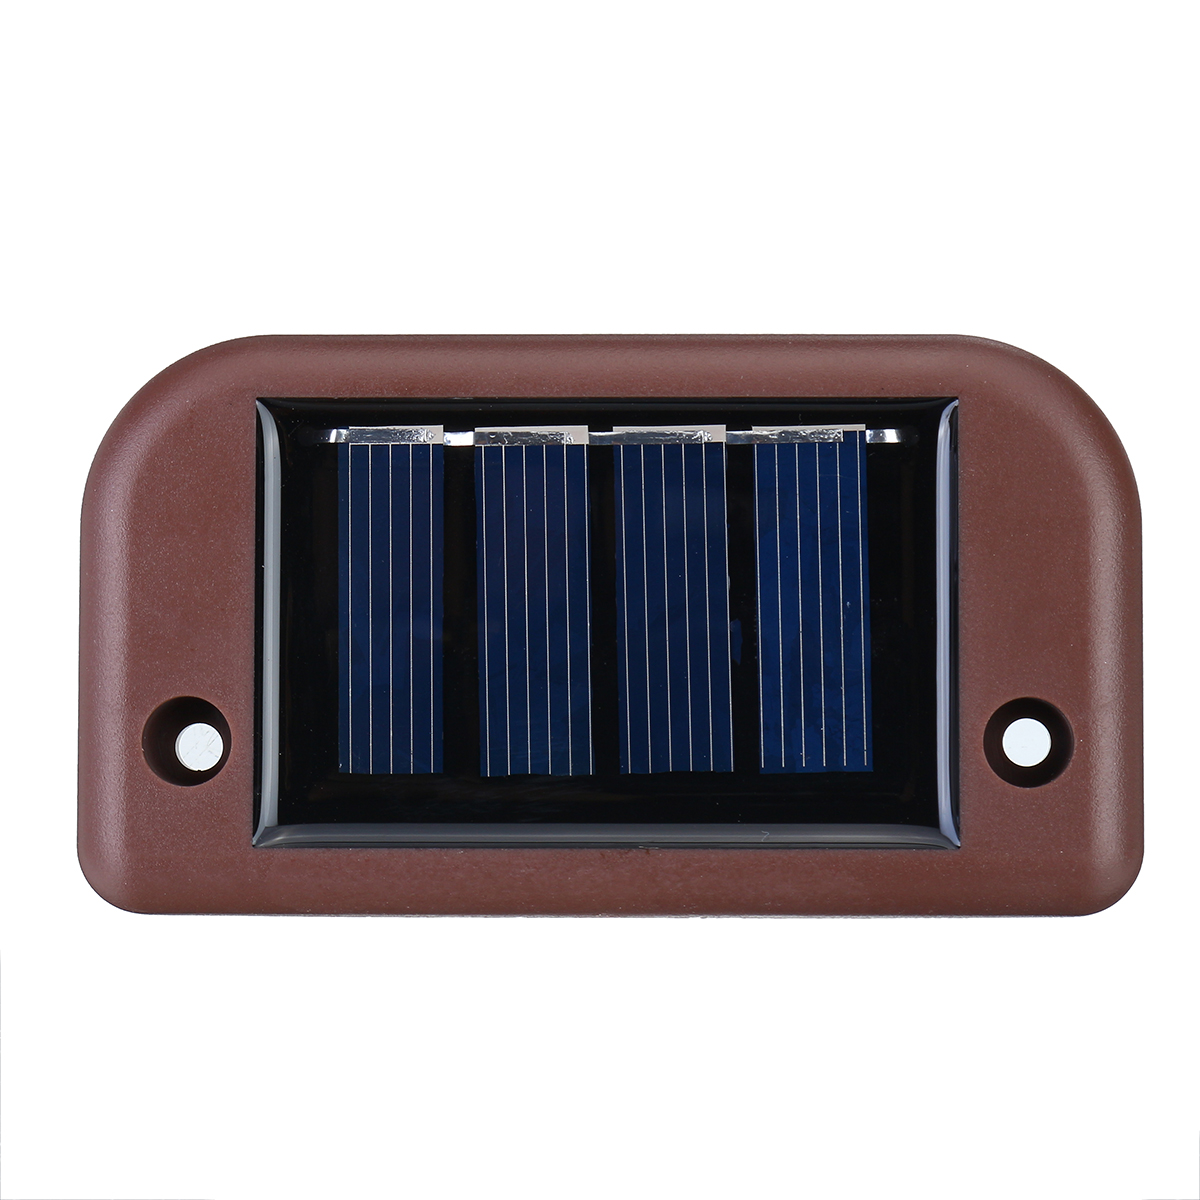 4PCS-LED-Solar-Path-Stair-Lamp-Outdoor-Waterproof-Wall-Lawn-Light-for-Garden-Home-1754581-5